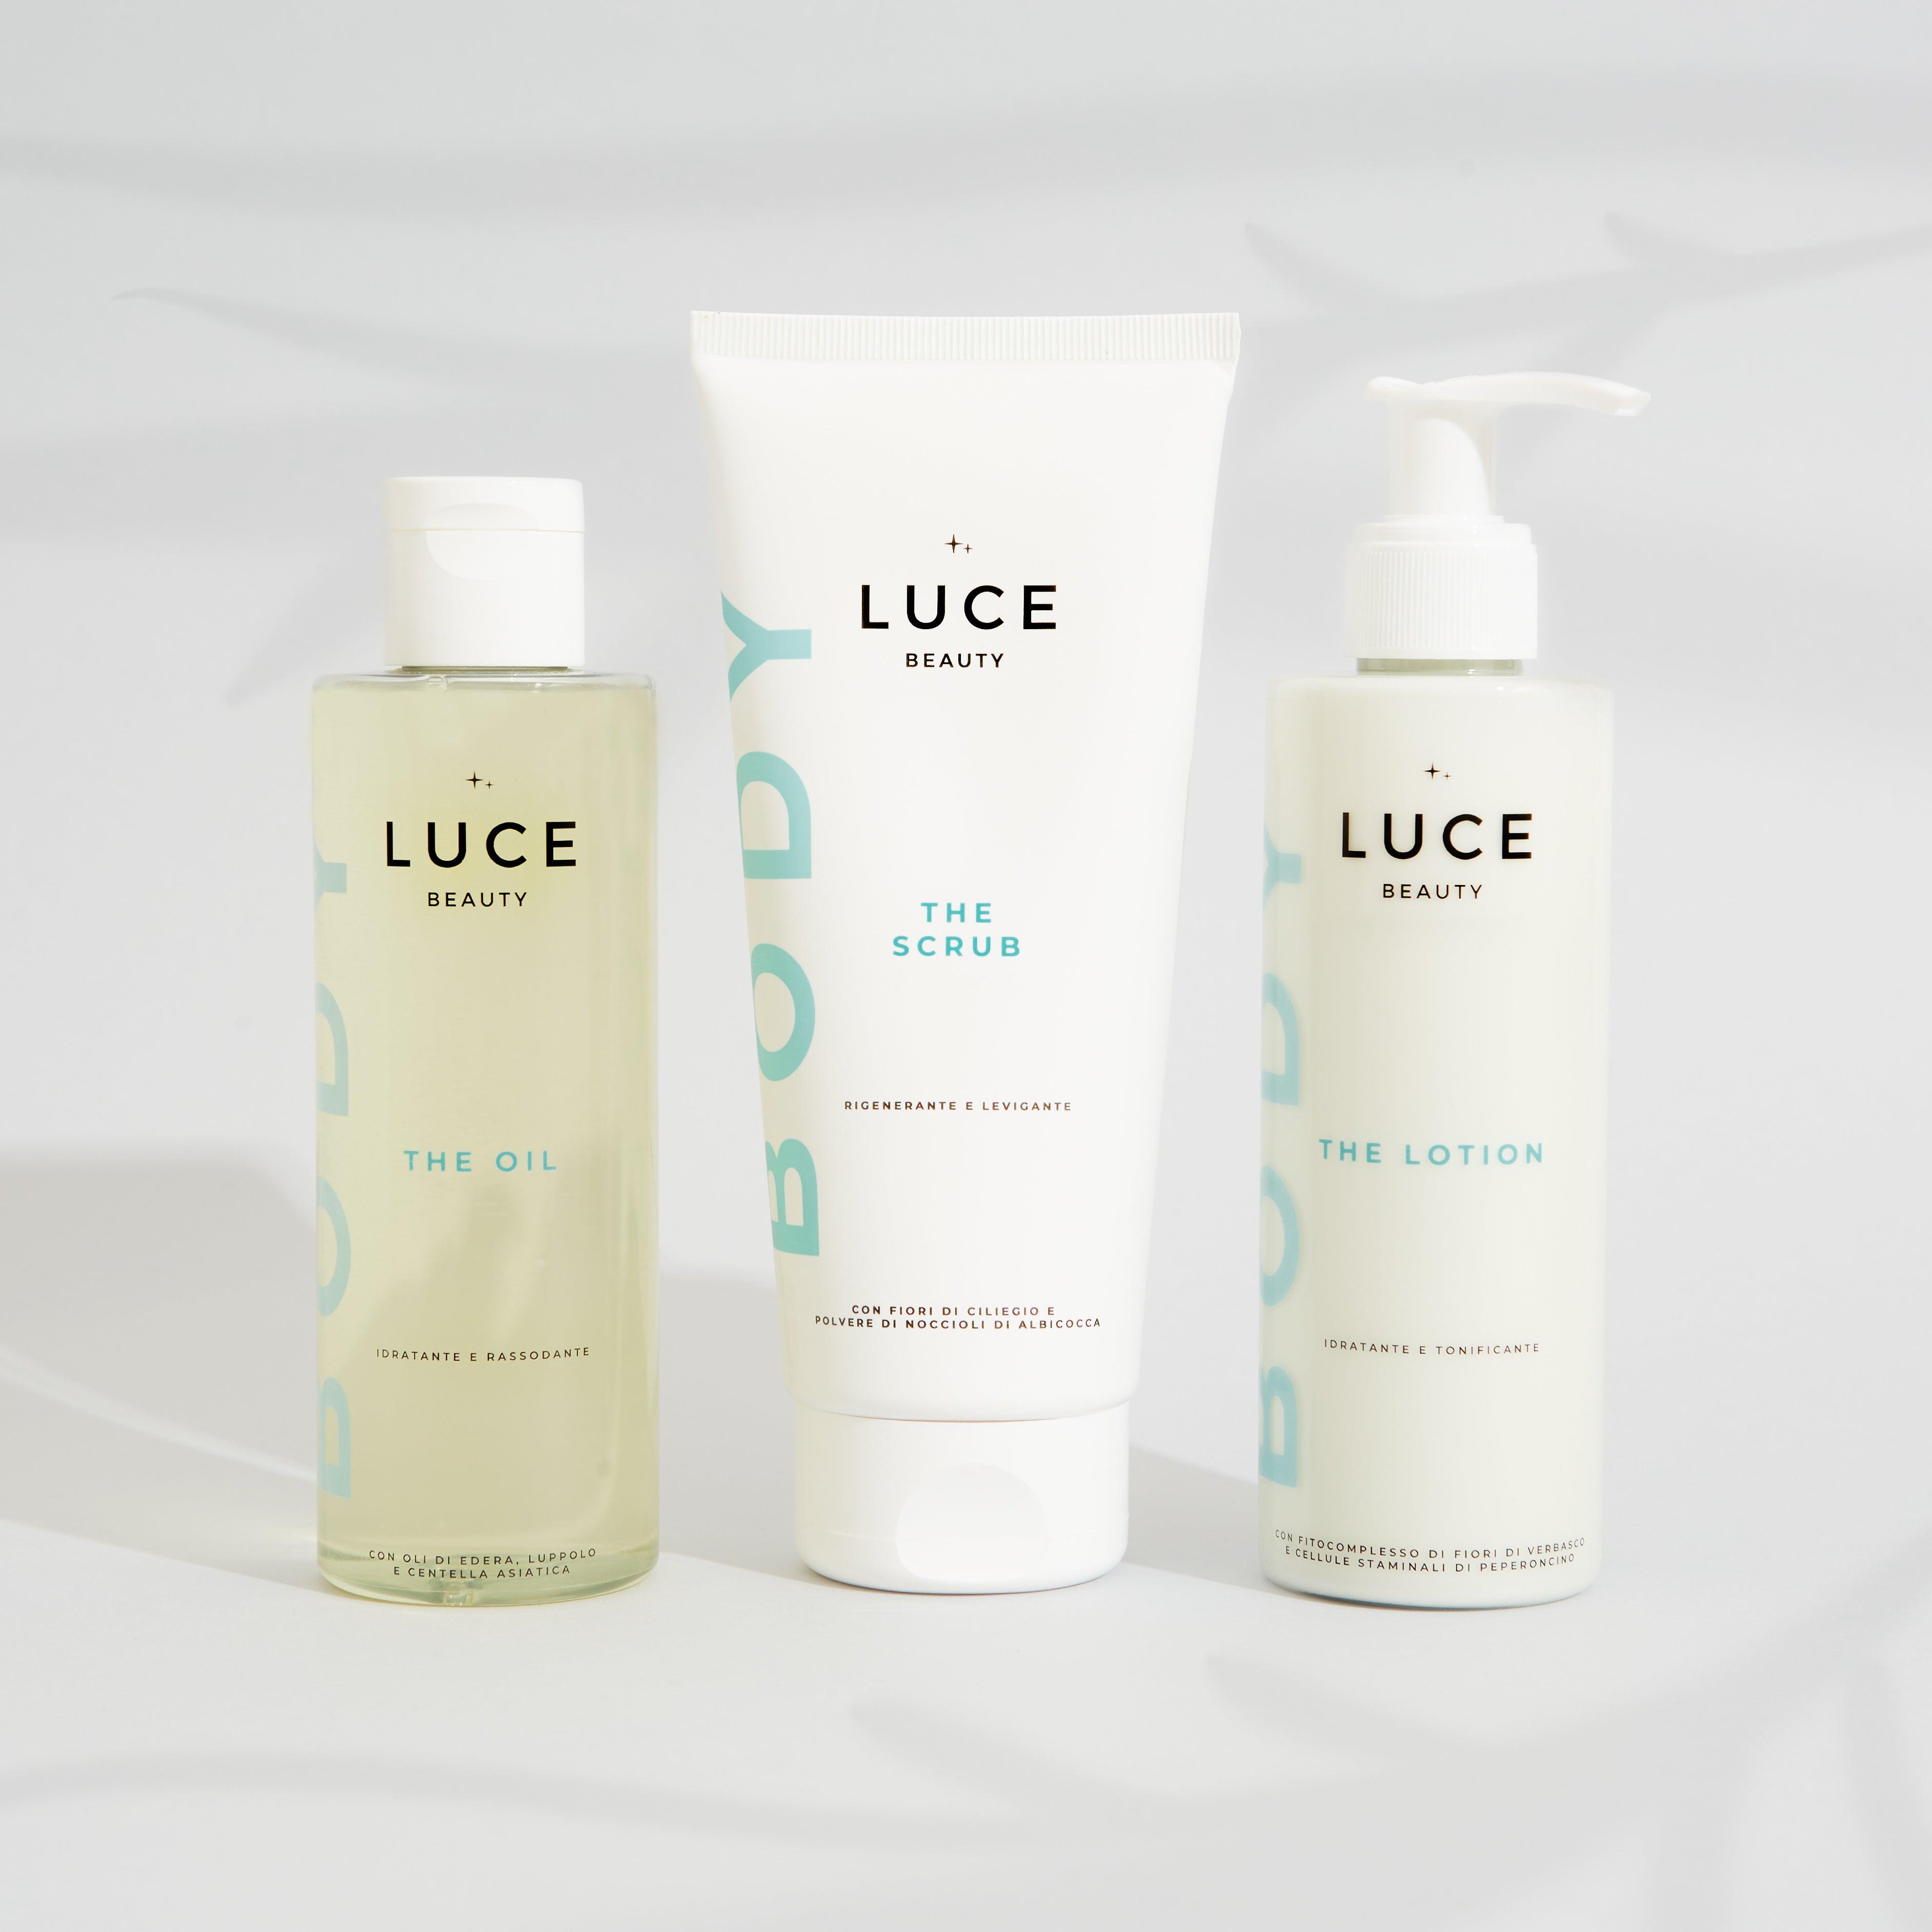 The Body Routine - The lotion, the oil, the scrub - Luce Beauty by Alessia Marcuzzi